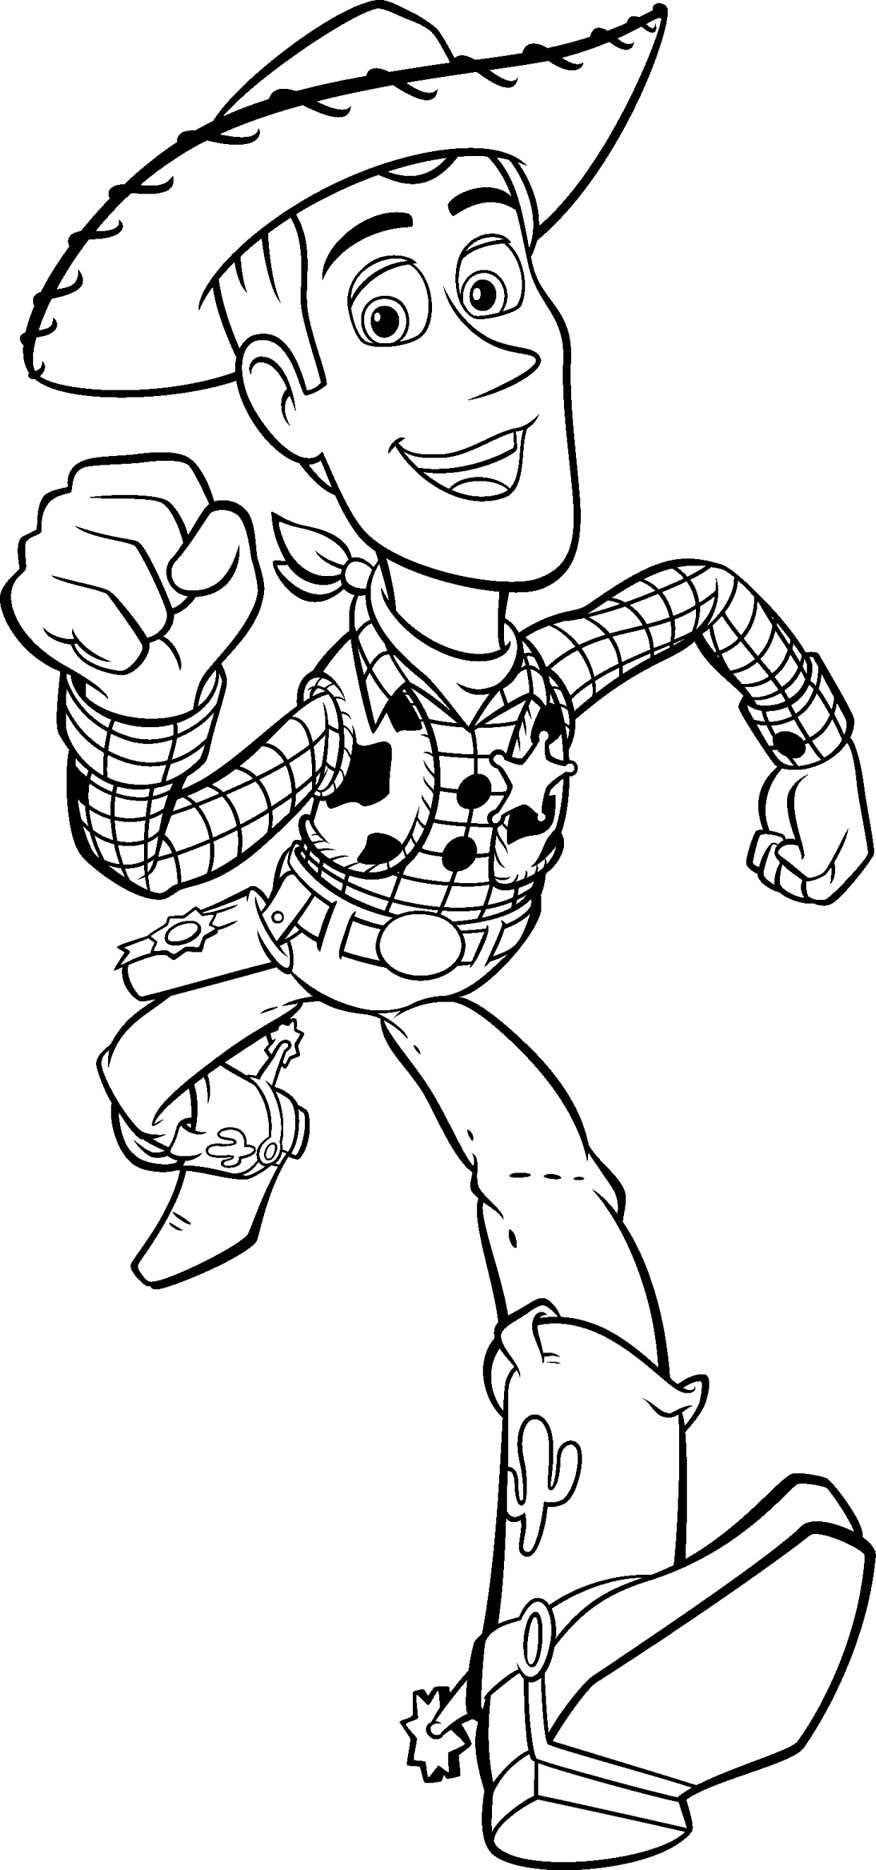 Disney Coloring Pages For Boys
 Free Printable Toy Story Coloring Pages For Kids